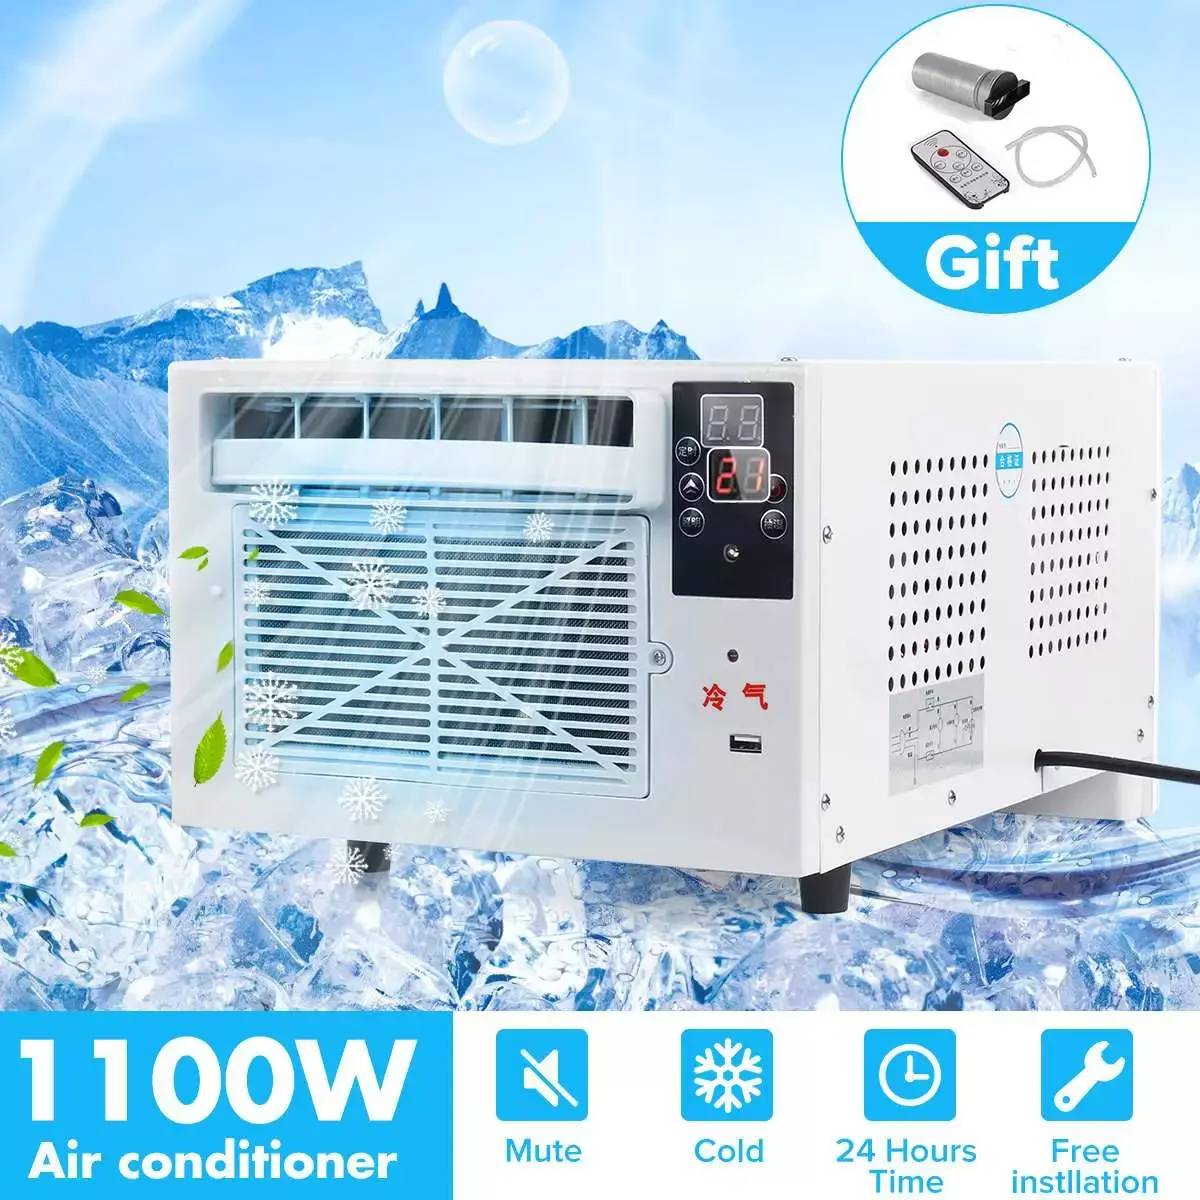 1100W Desktop Air Conditioner 220V Air Conditioning Fan Timing Air Cooler Fans Remote Control Air Conditioner For Home Office